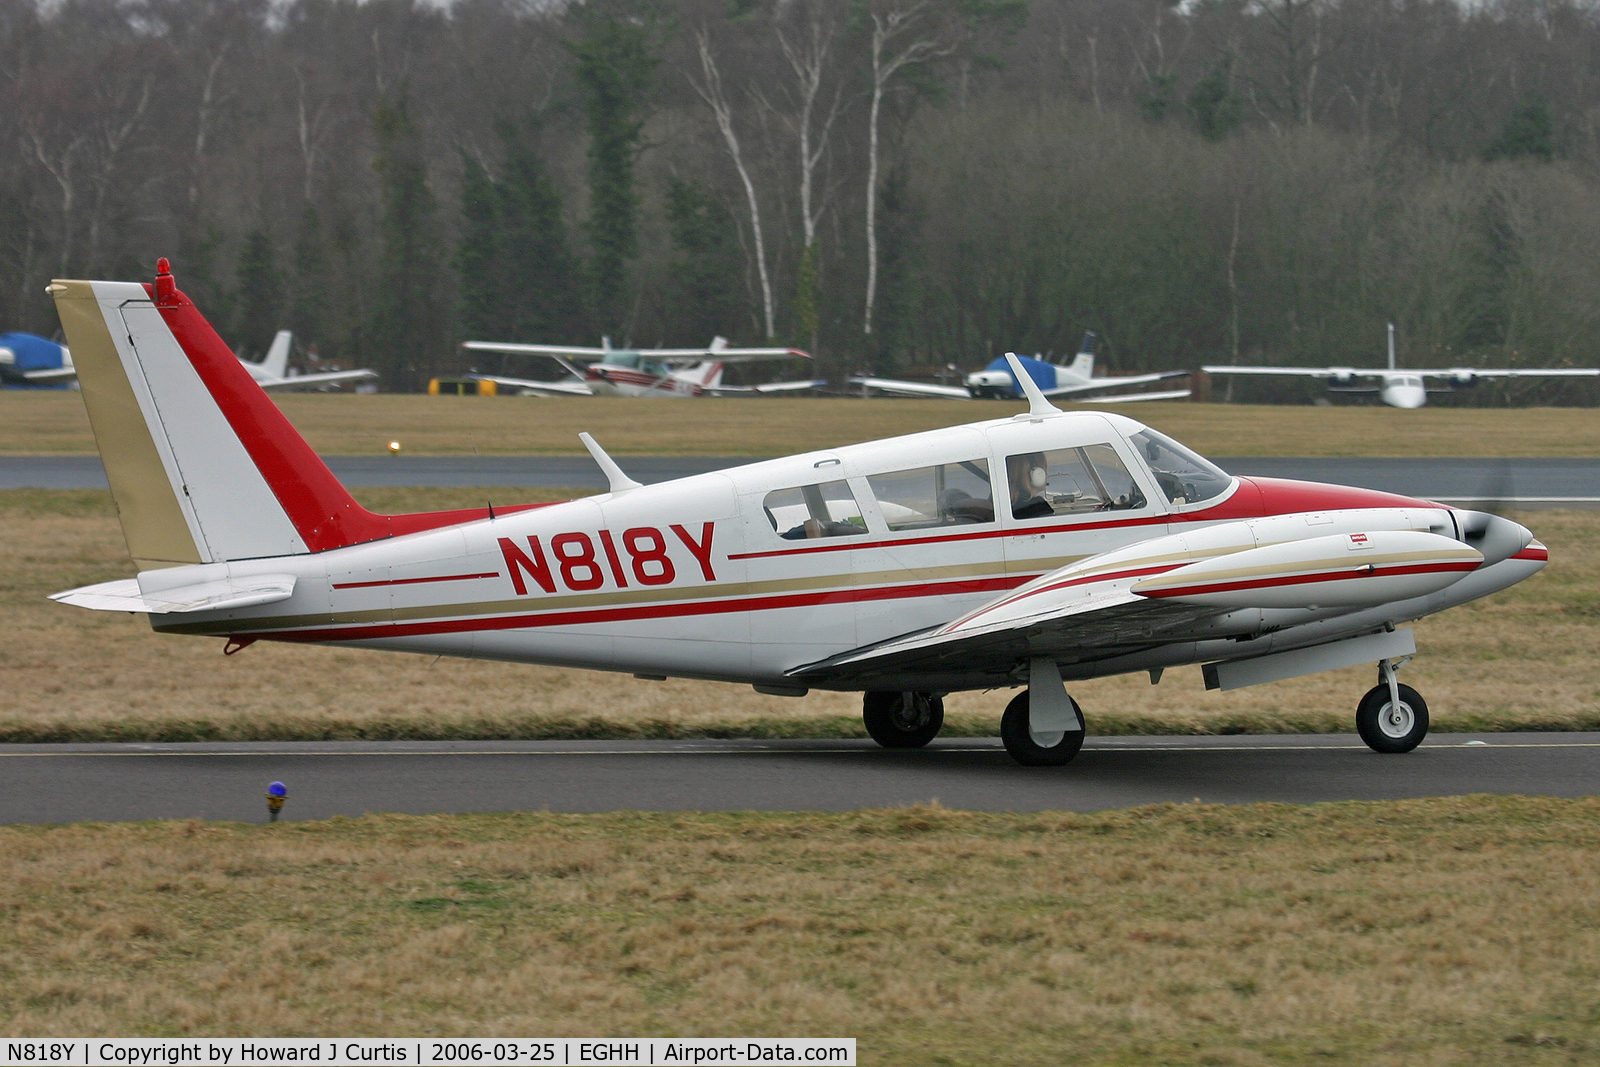 N818Y, 1967 Piper PA-30 Twin Comanche Twin Comanche C/N 30-1458, Privately owned